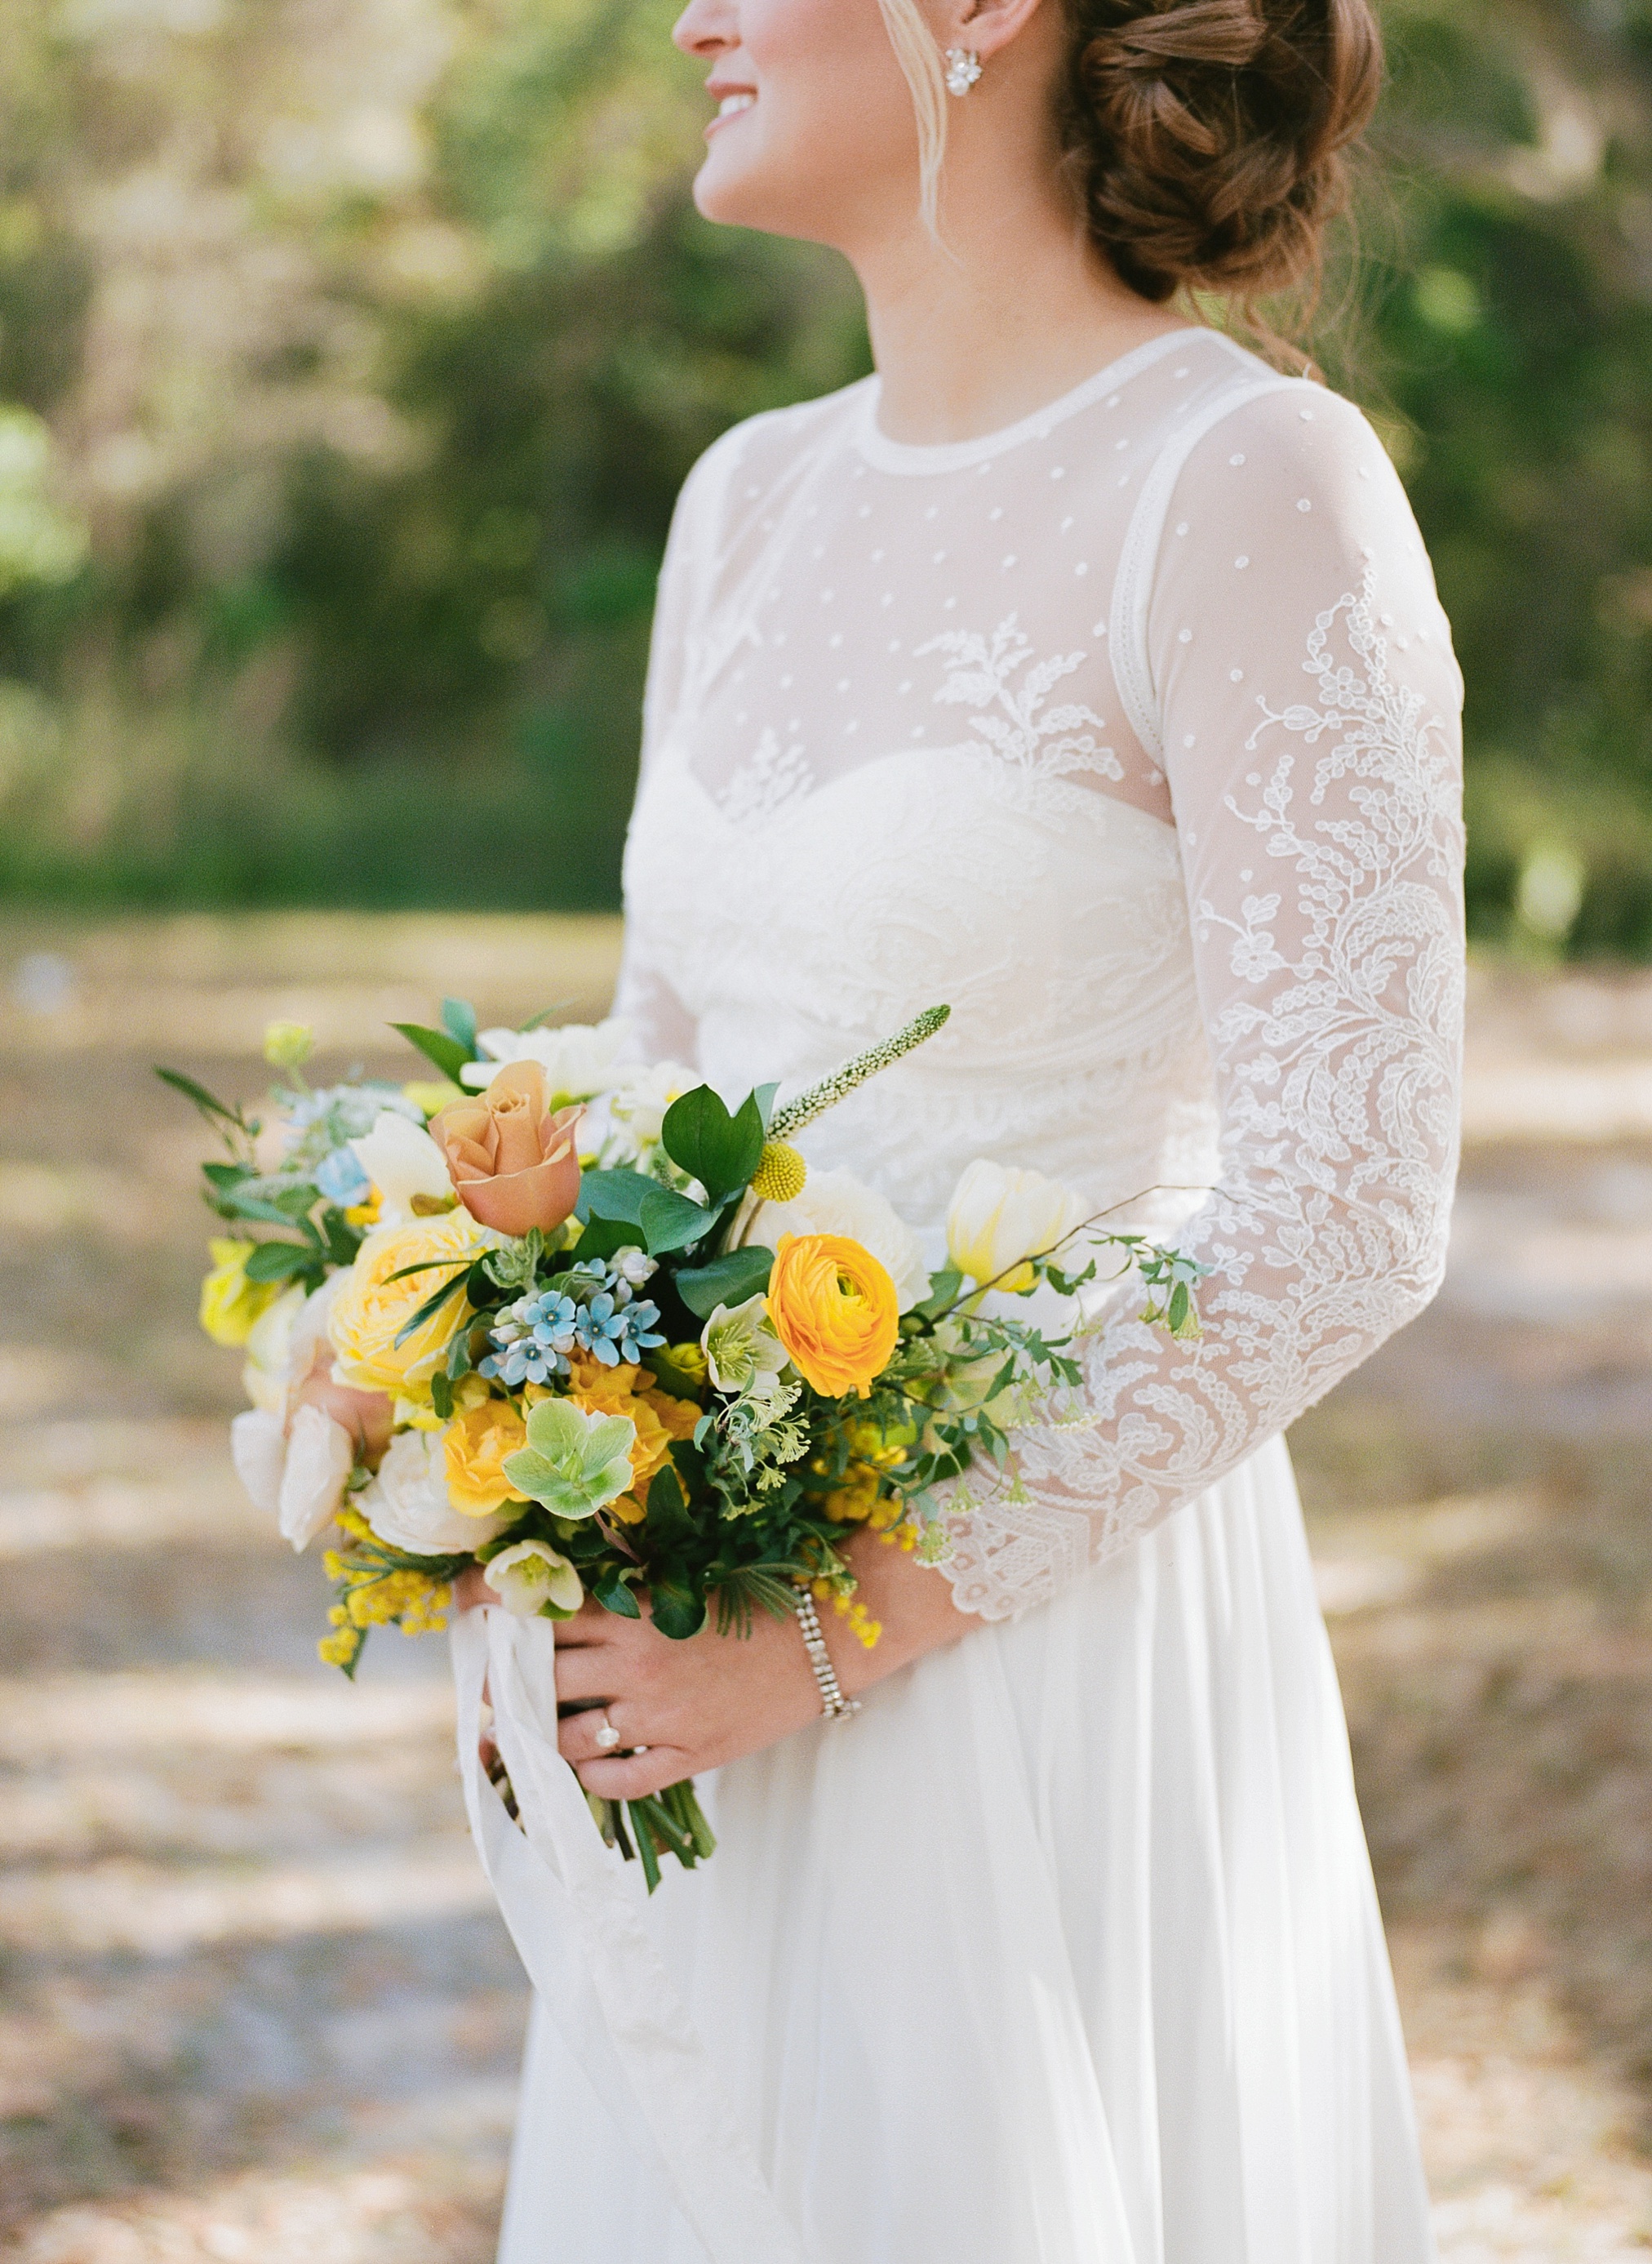 Lakeland Wedding at Haus 820, portrait of bride and groom with beautiful yellow florals 